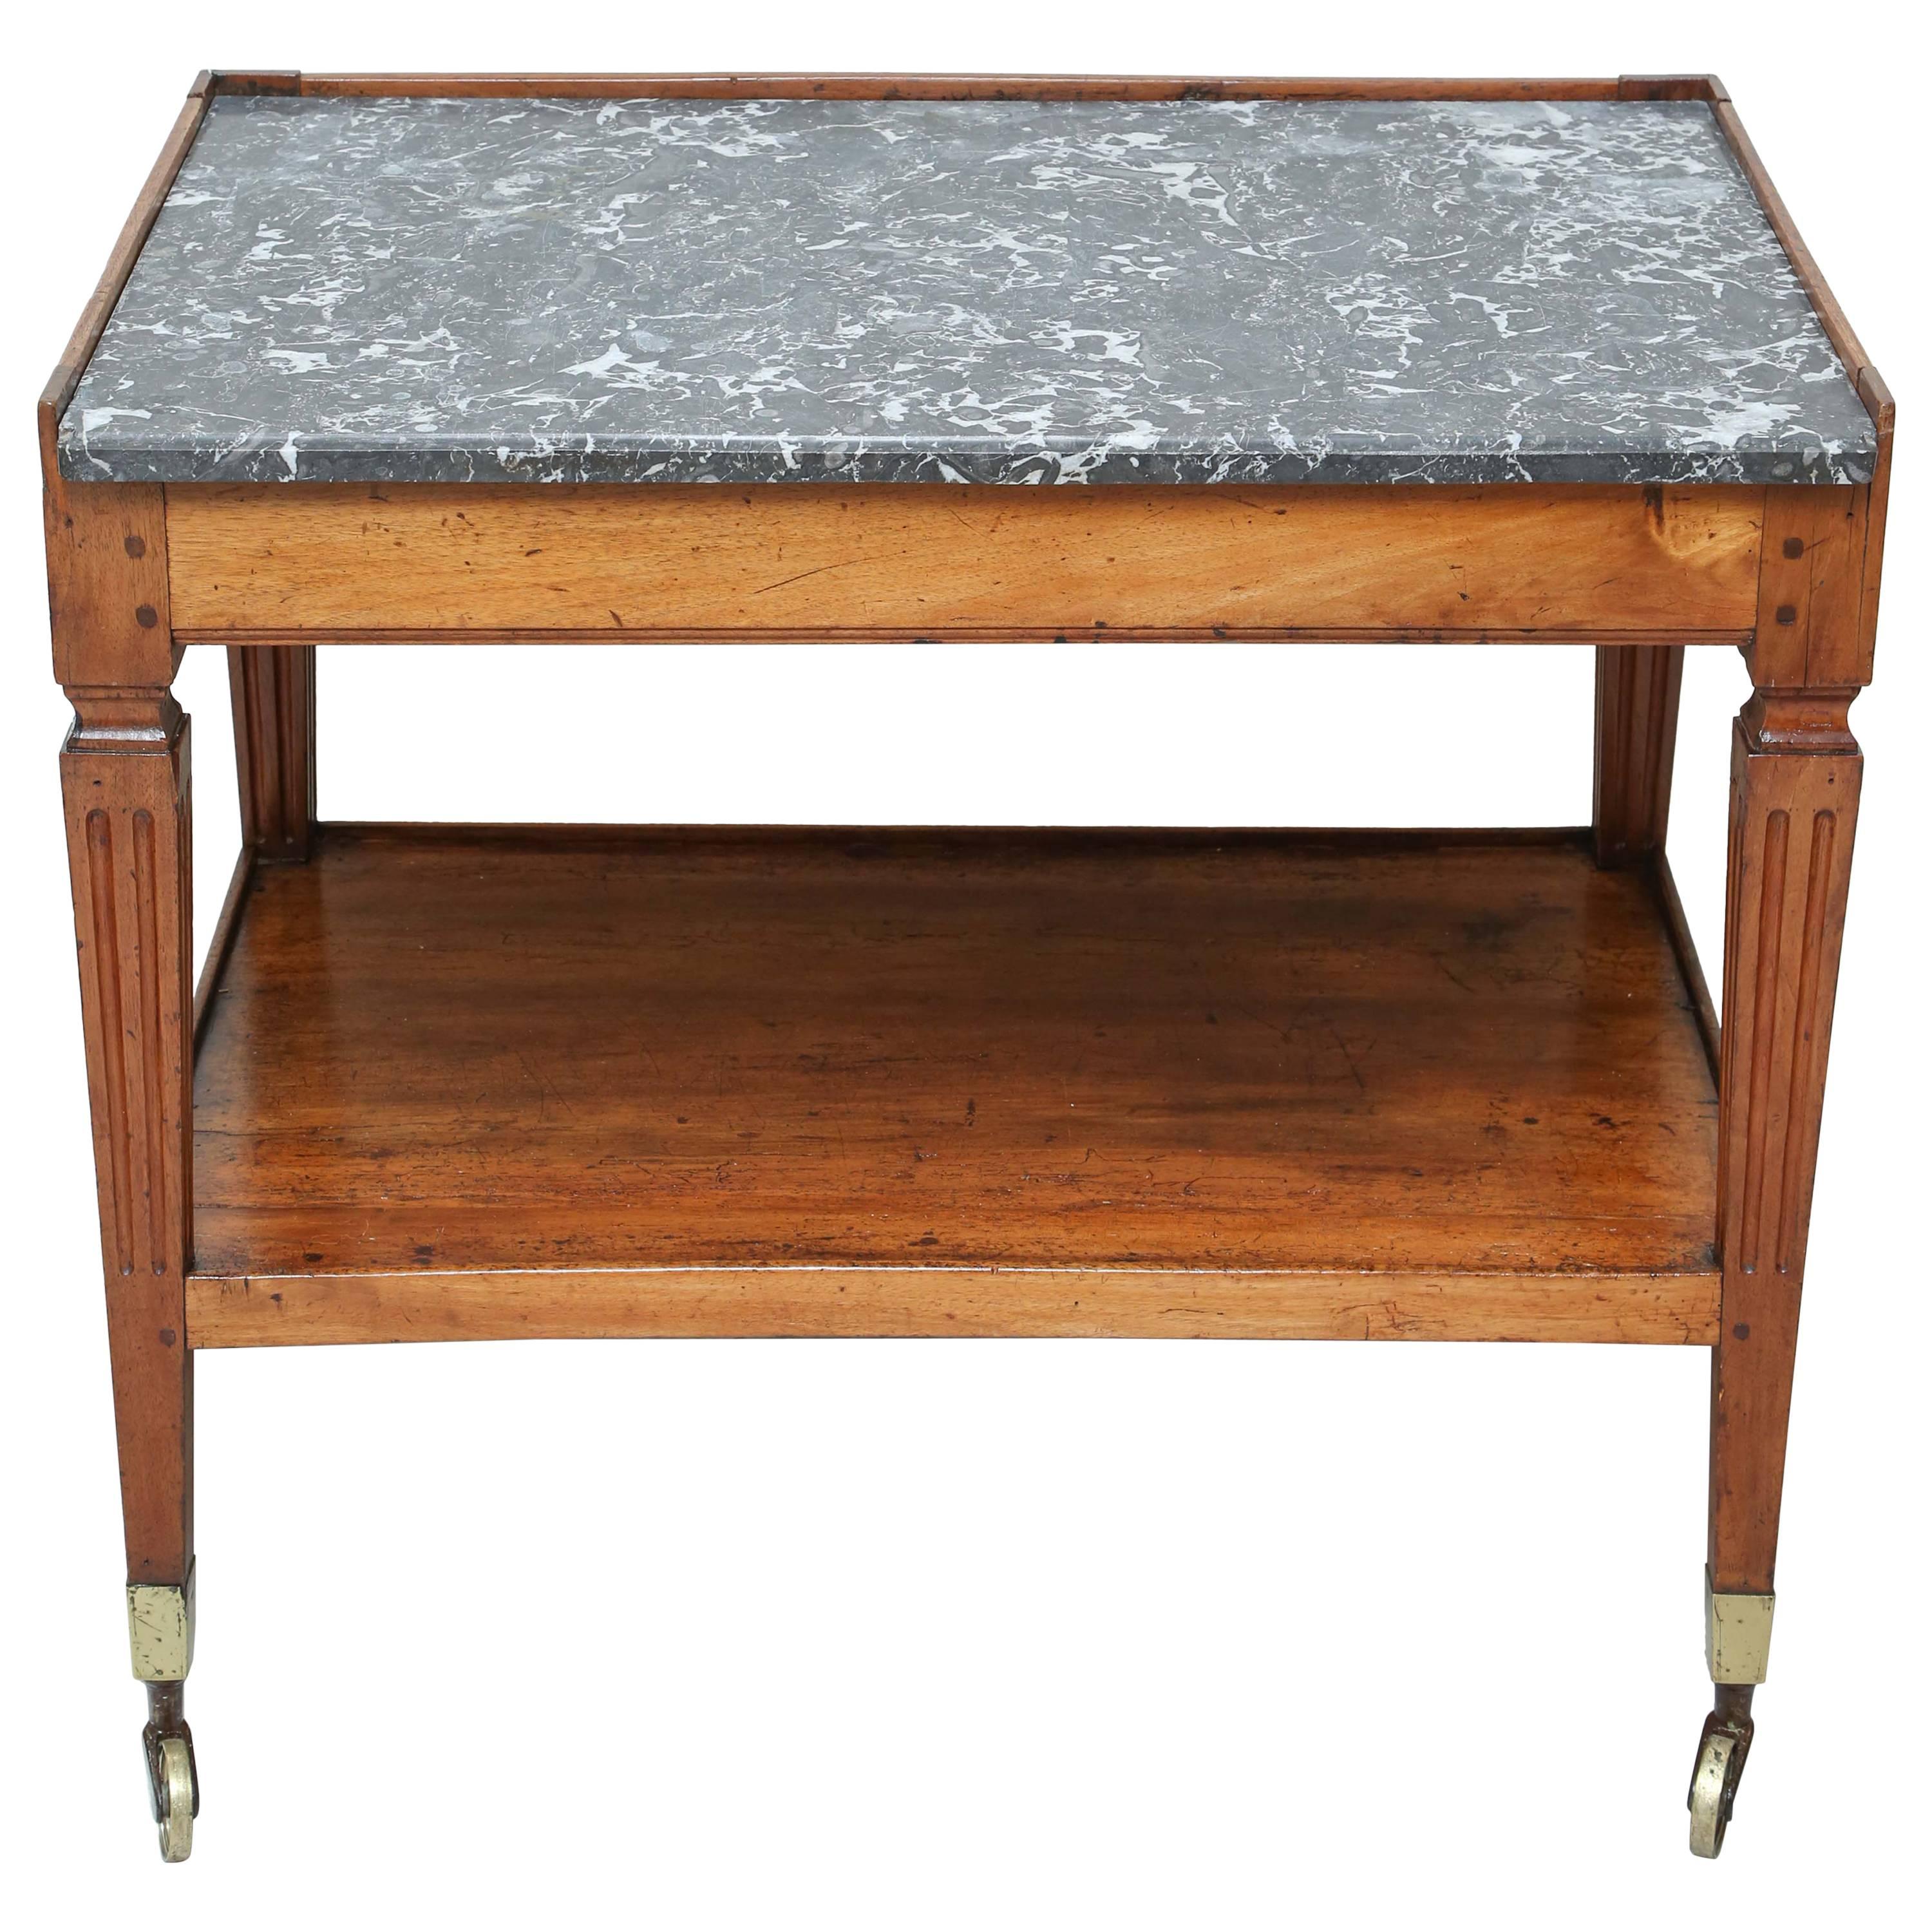 Antique Italian Two-Tiered Cart with Marble Top